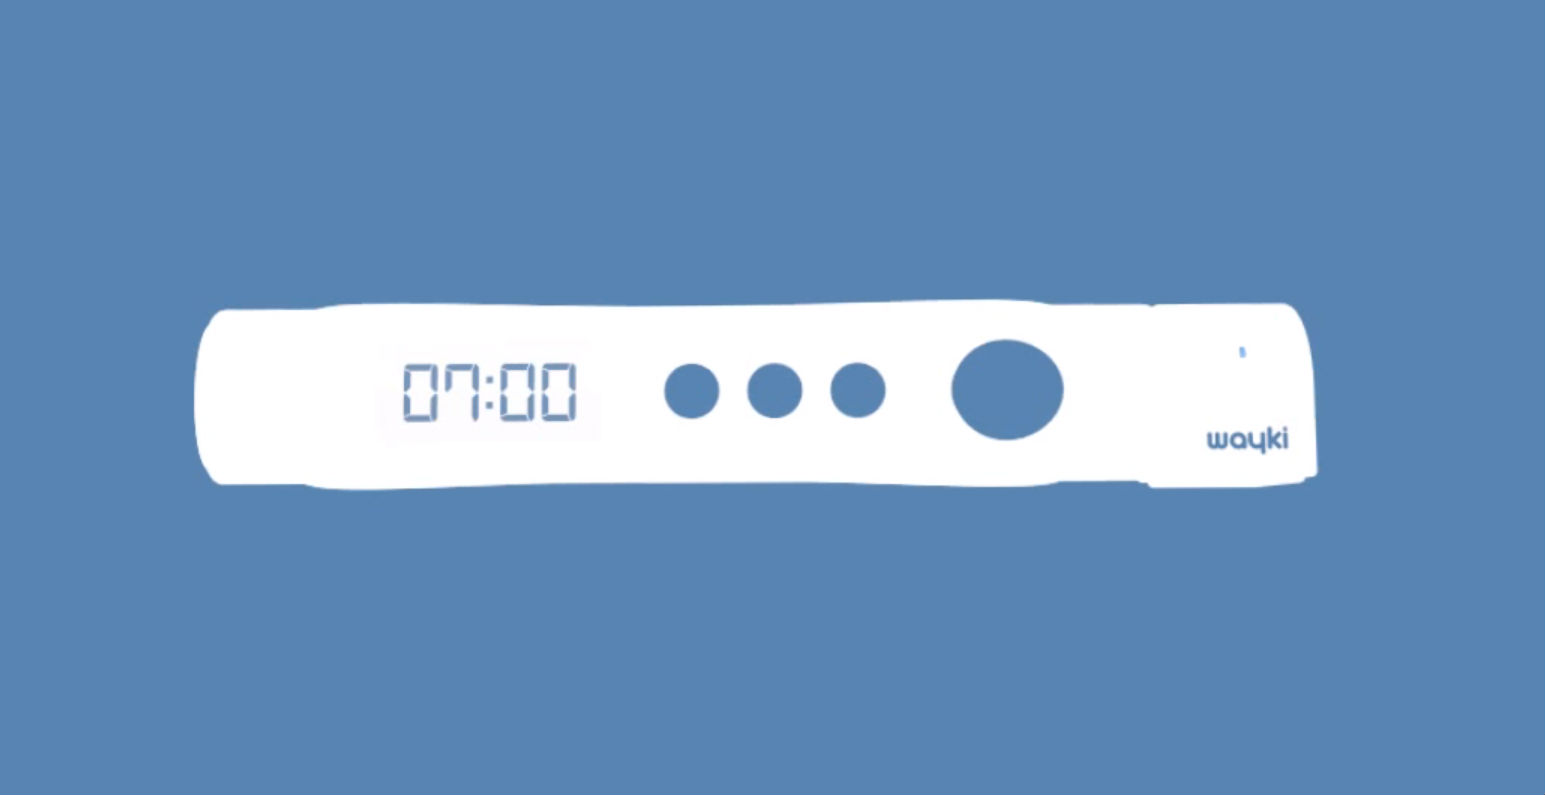 Alarm clock toothbrush – are you ready?